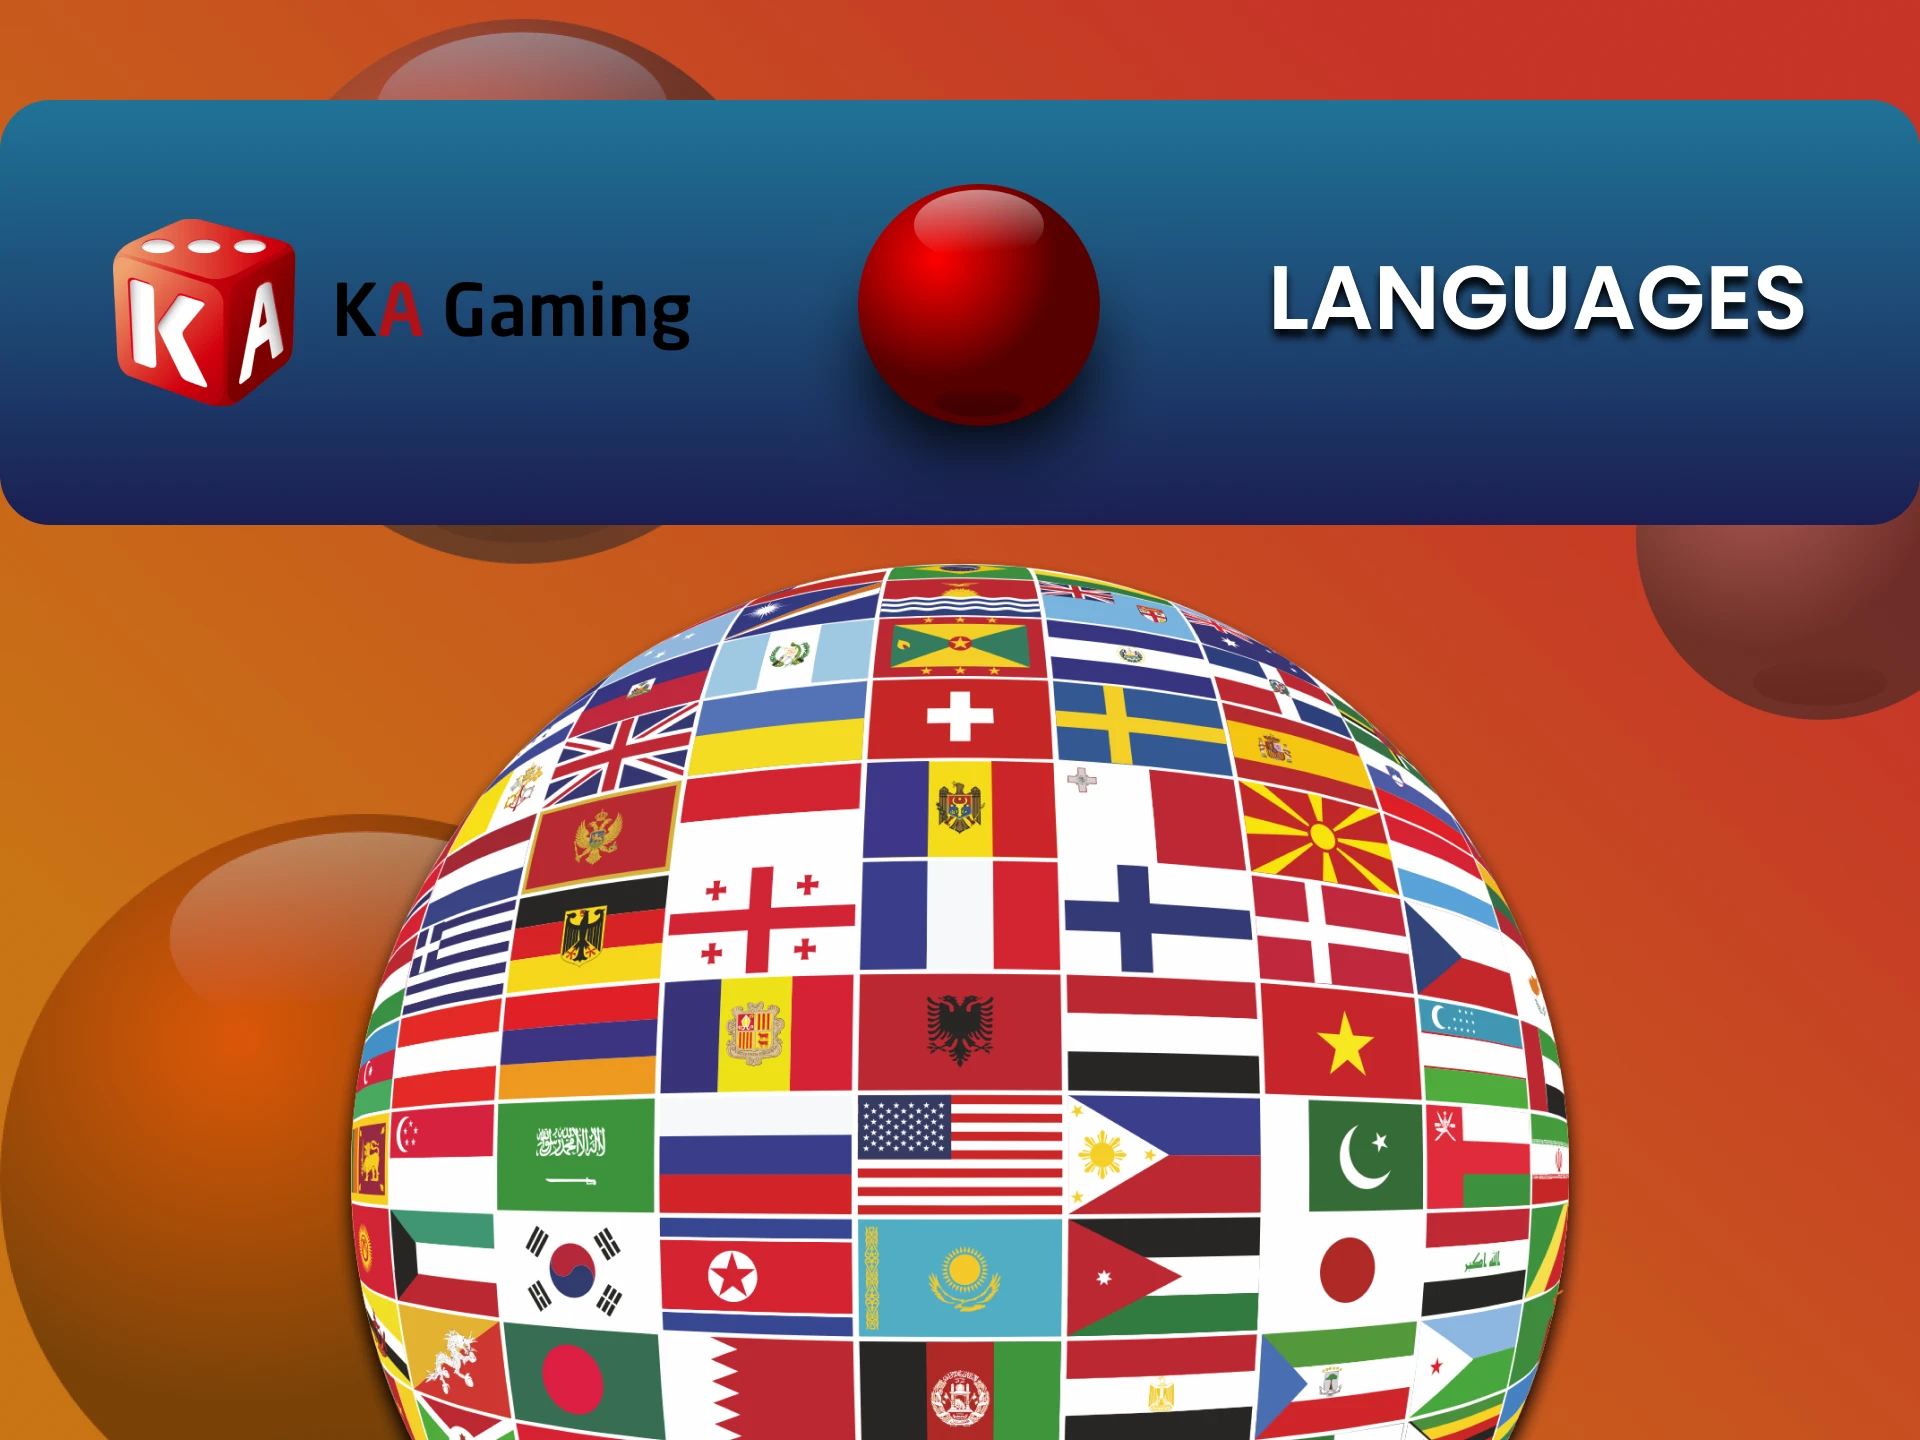 Find out what languages ​​interfaces are available in games from KA Gaming.